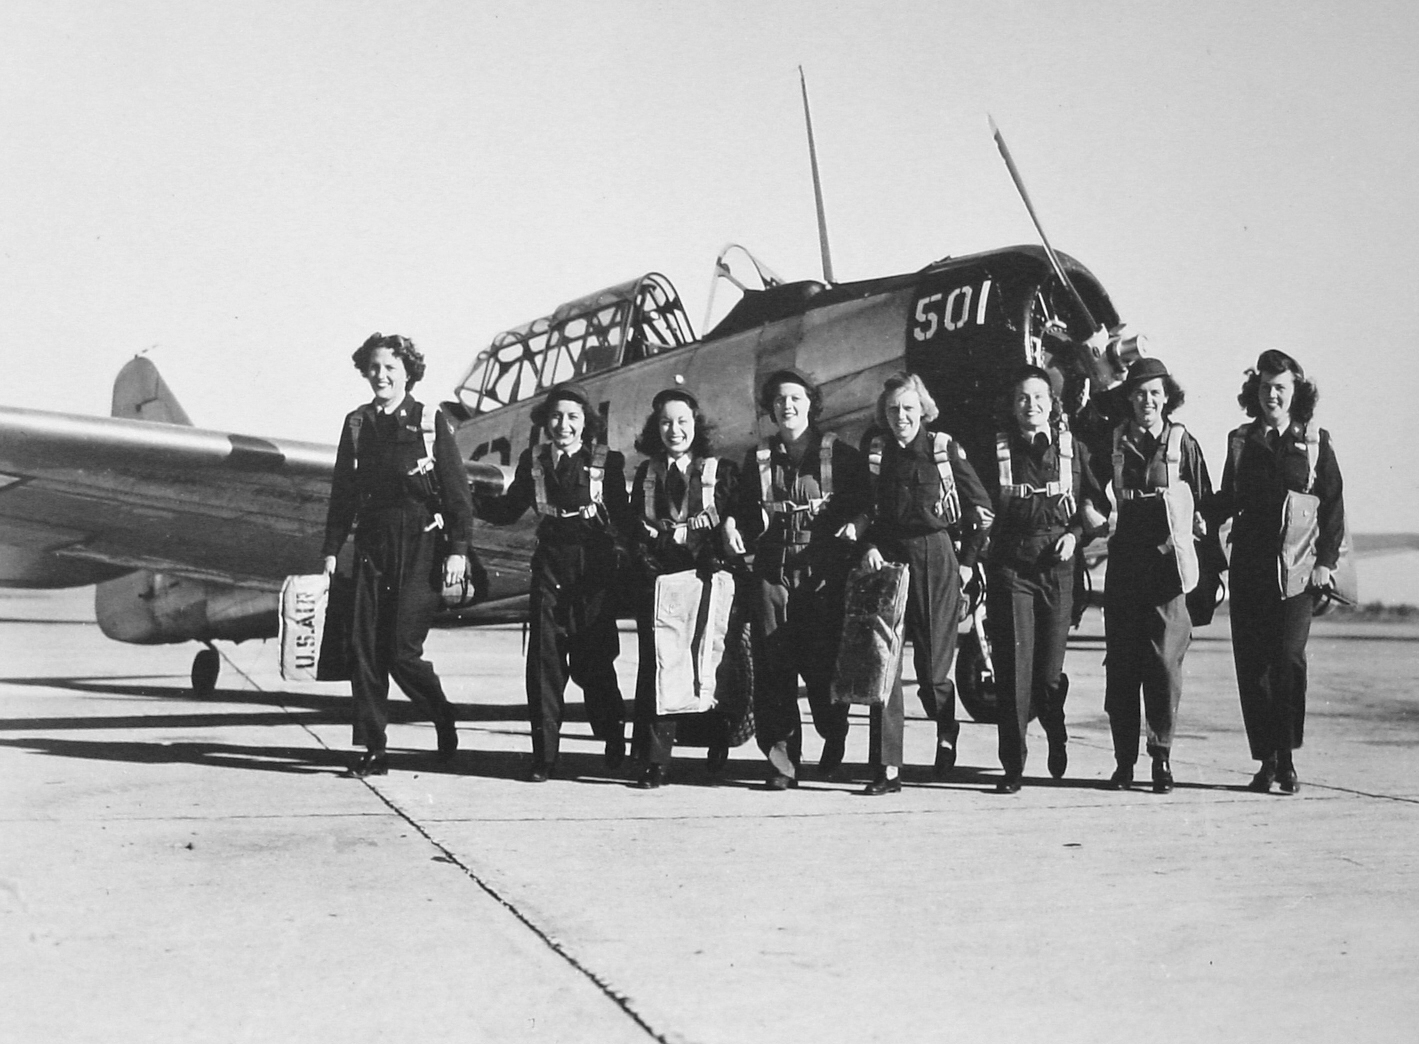 Eight WASP pilots in front of a North American AT-6 Texan 3 days before the WASPs were disbanded, Waco Army Airfield, Texas, United States, Nov 27, 1944. Photo 2 of 2.